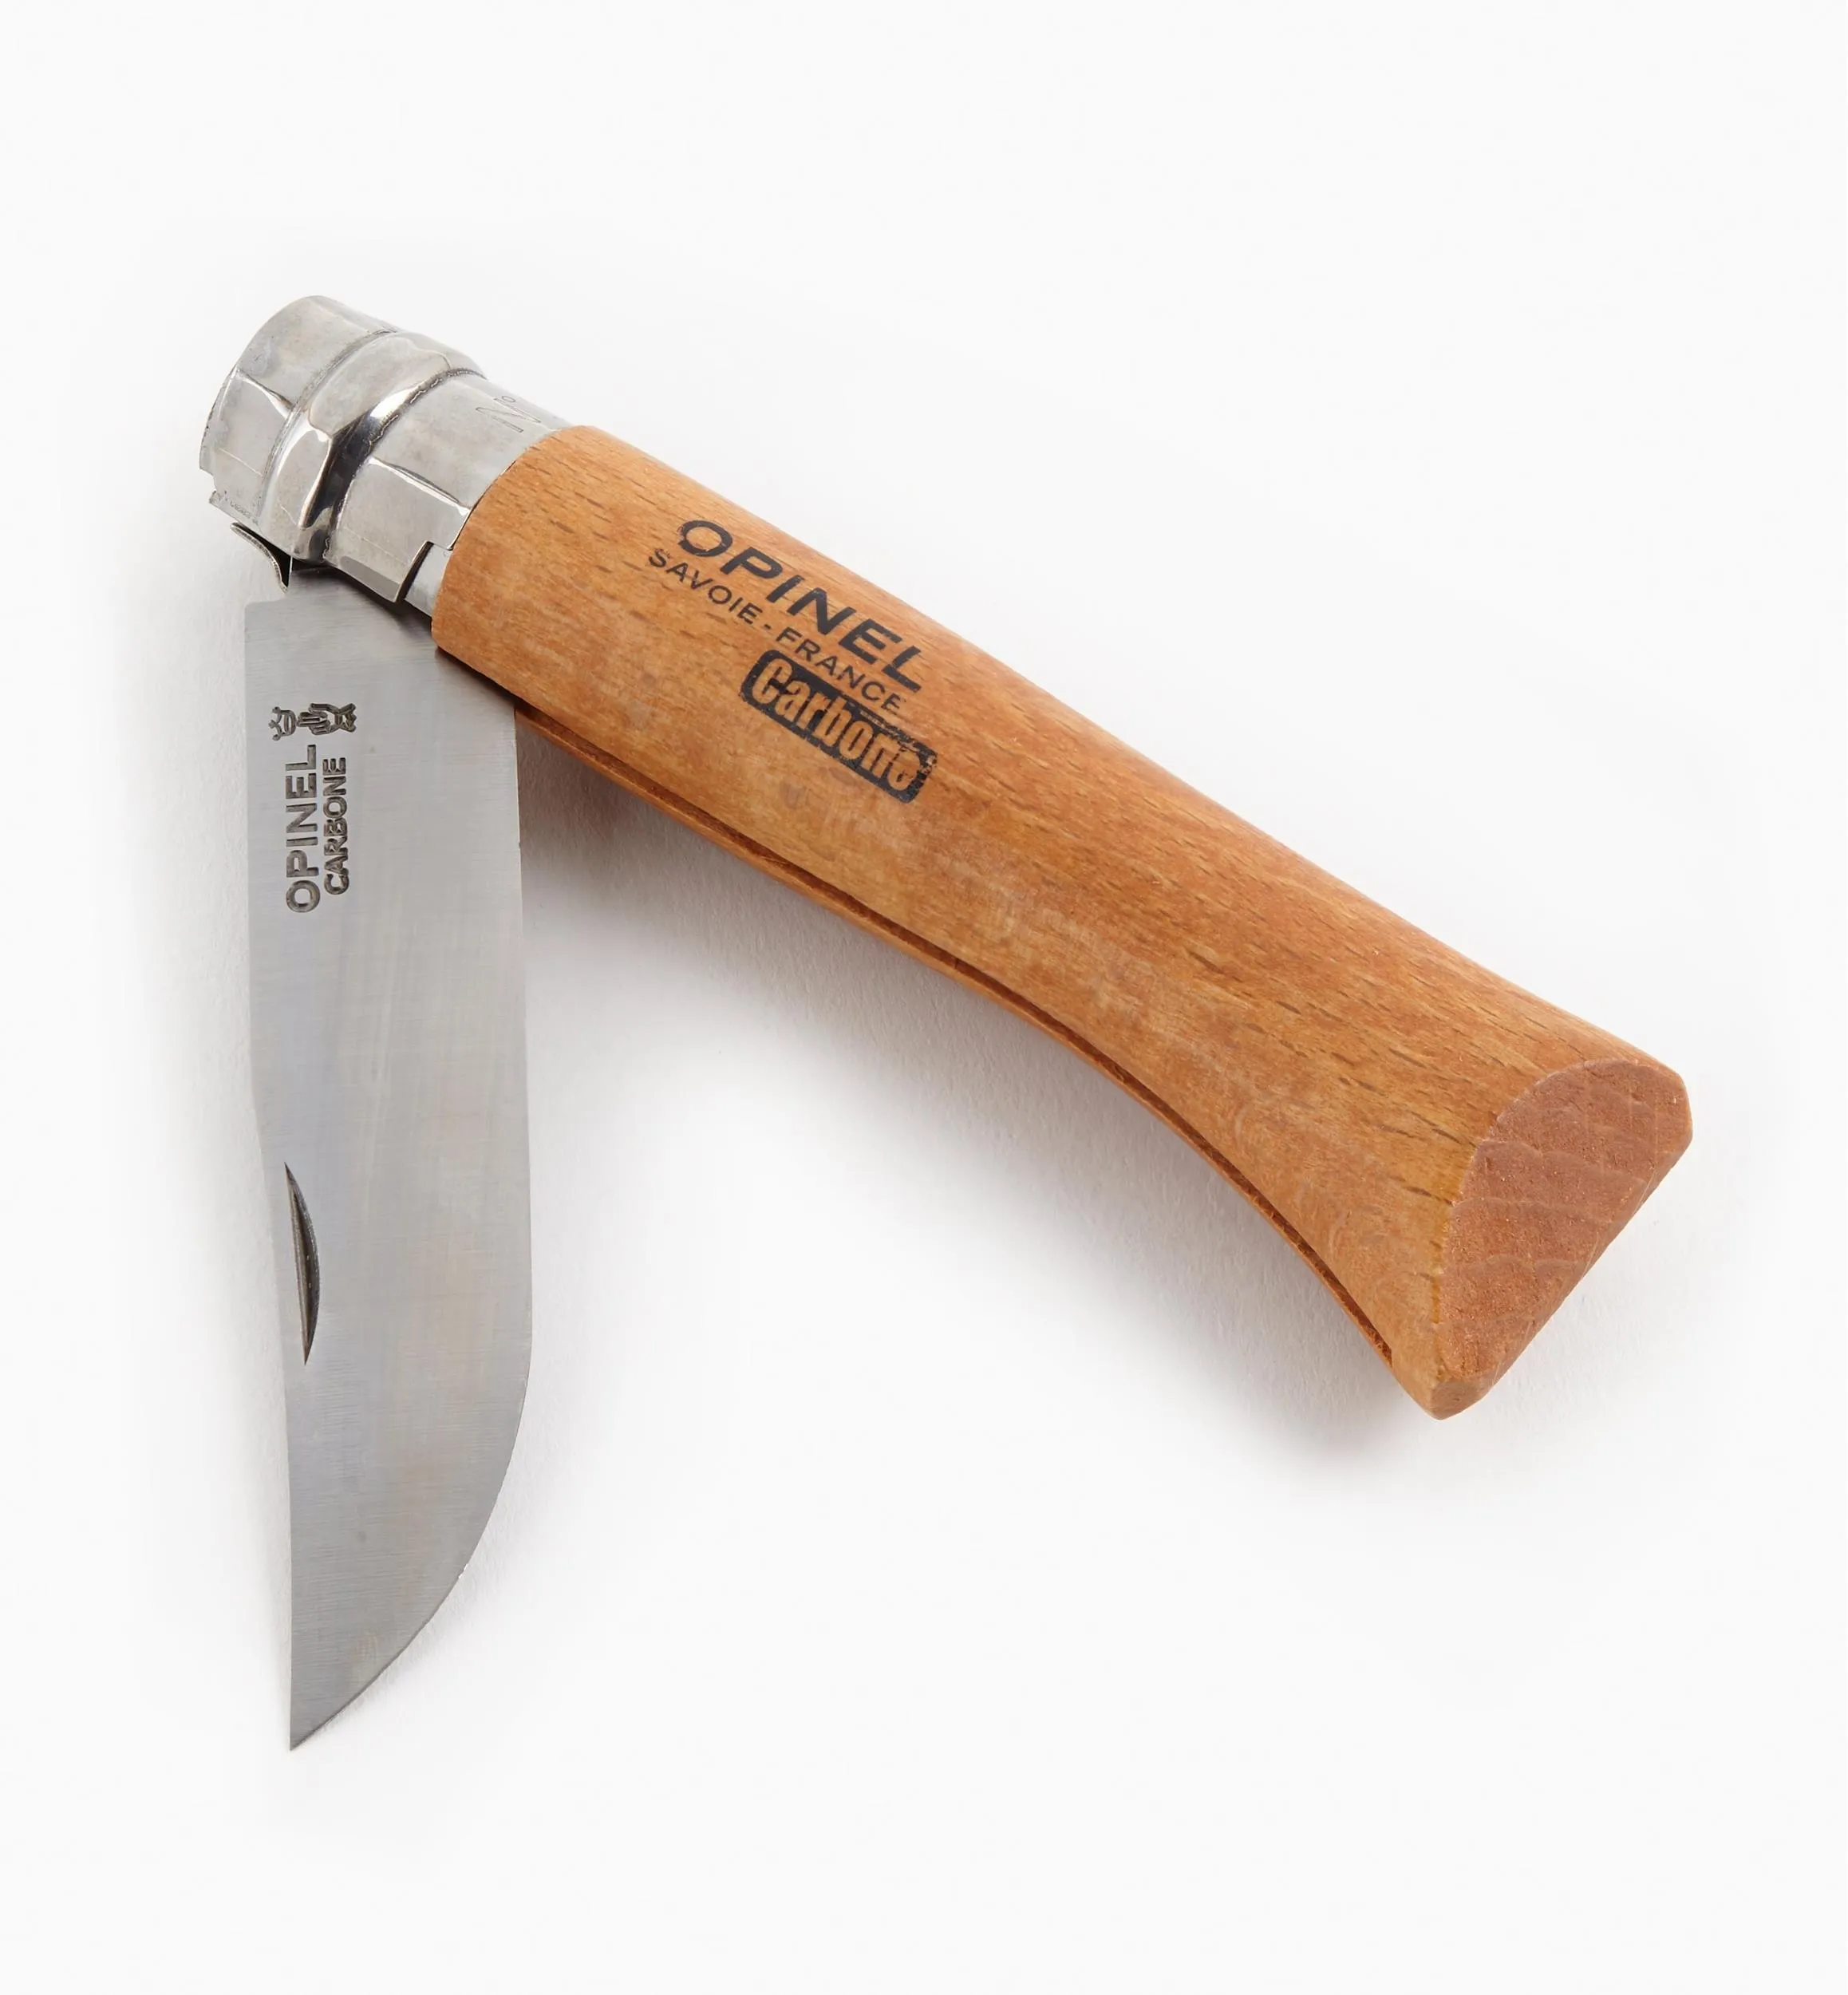 Opinel Carbon Knives